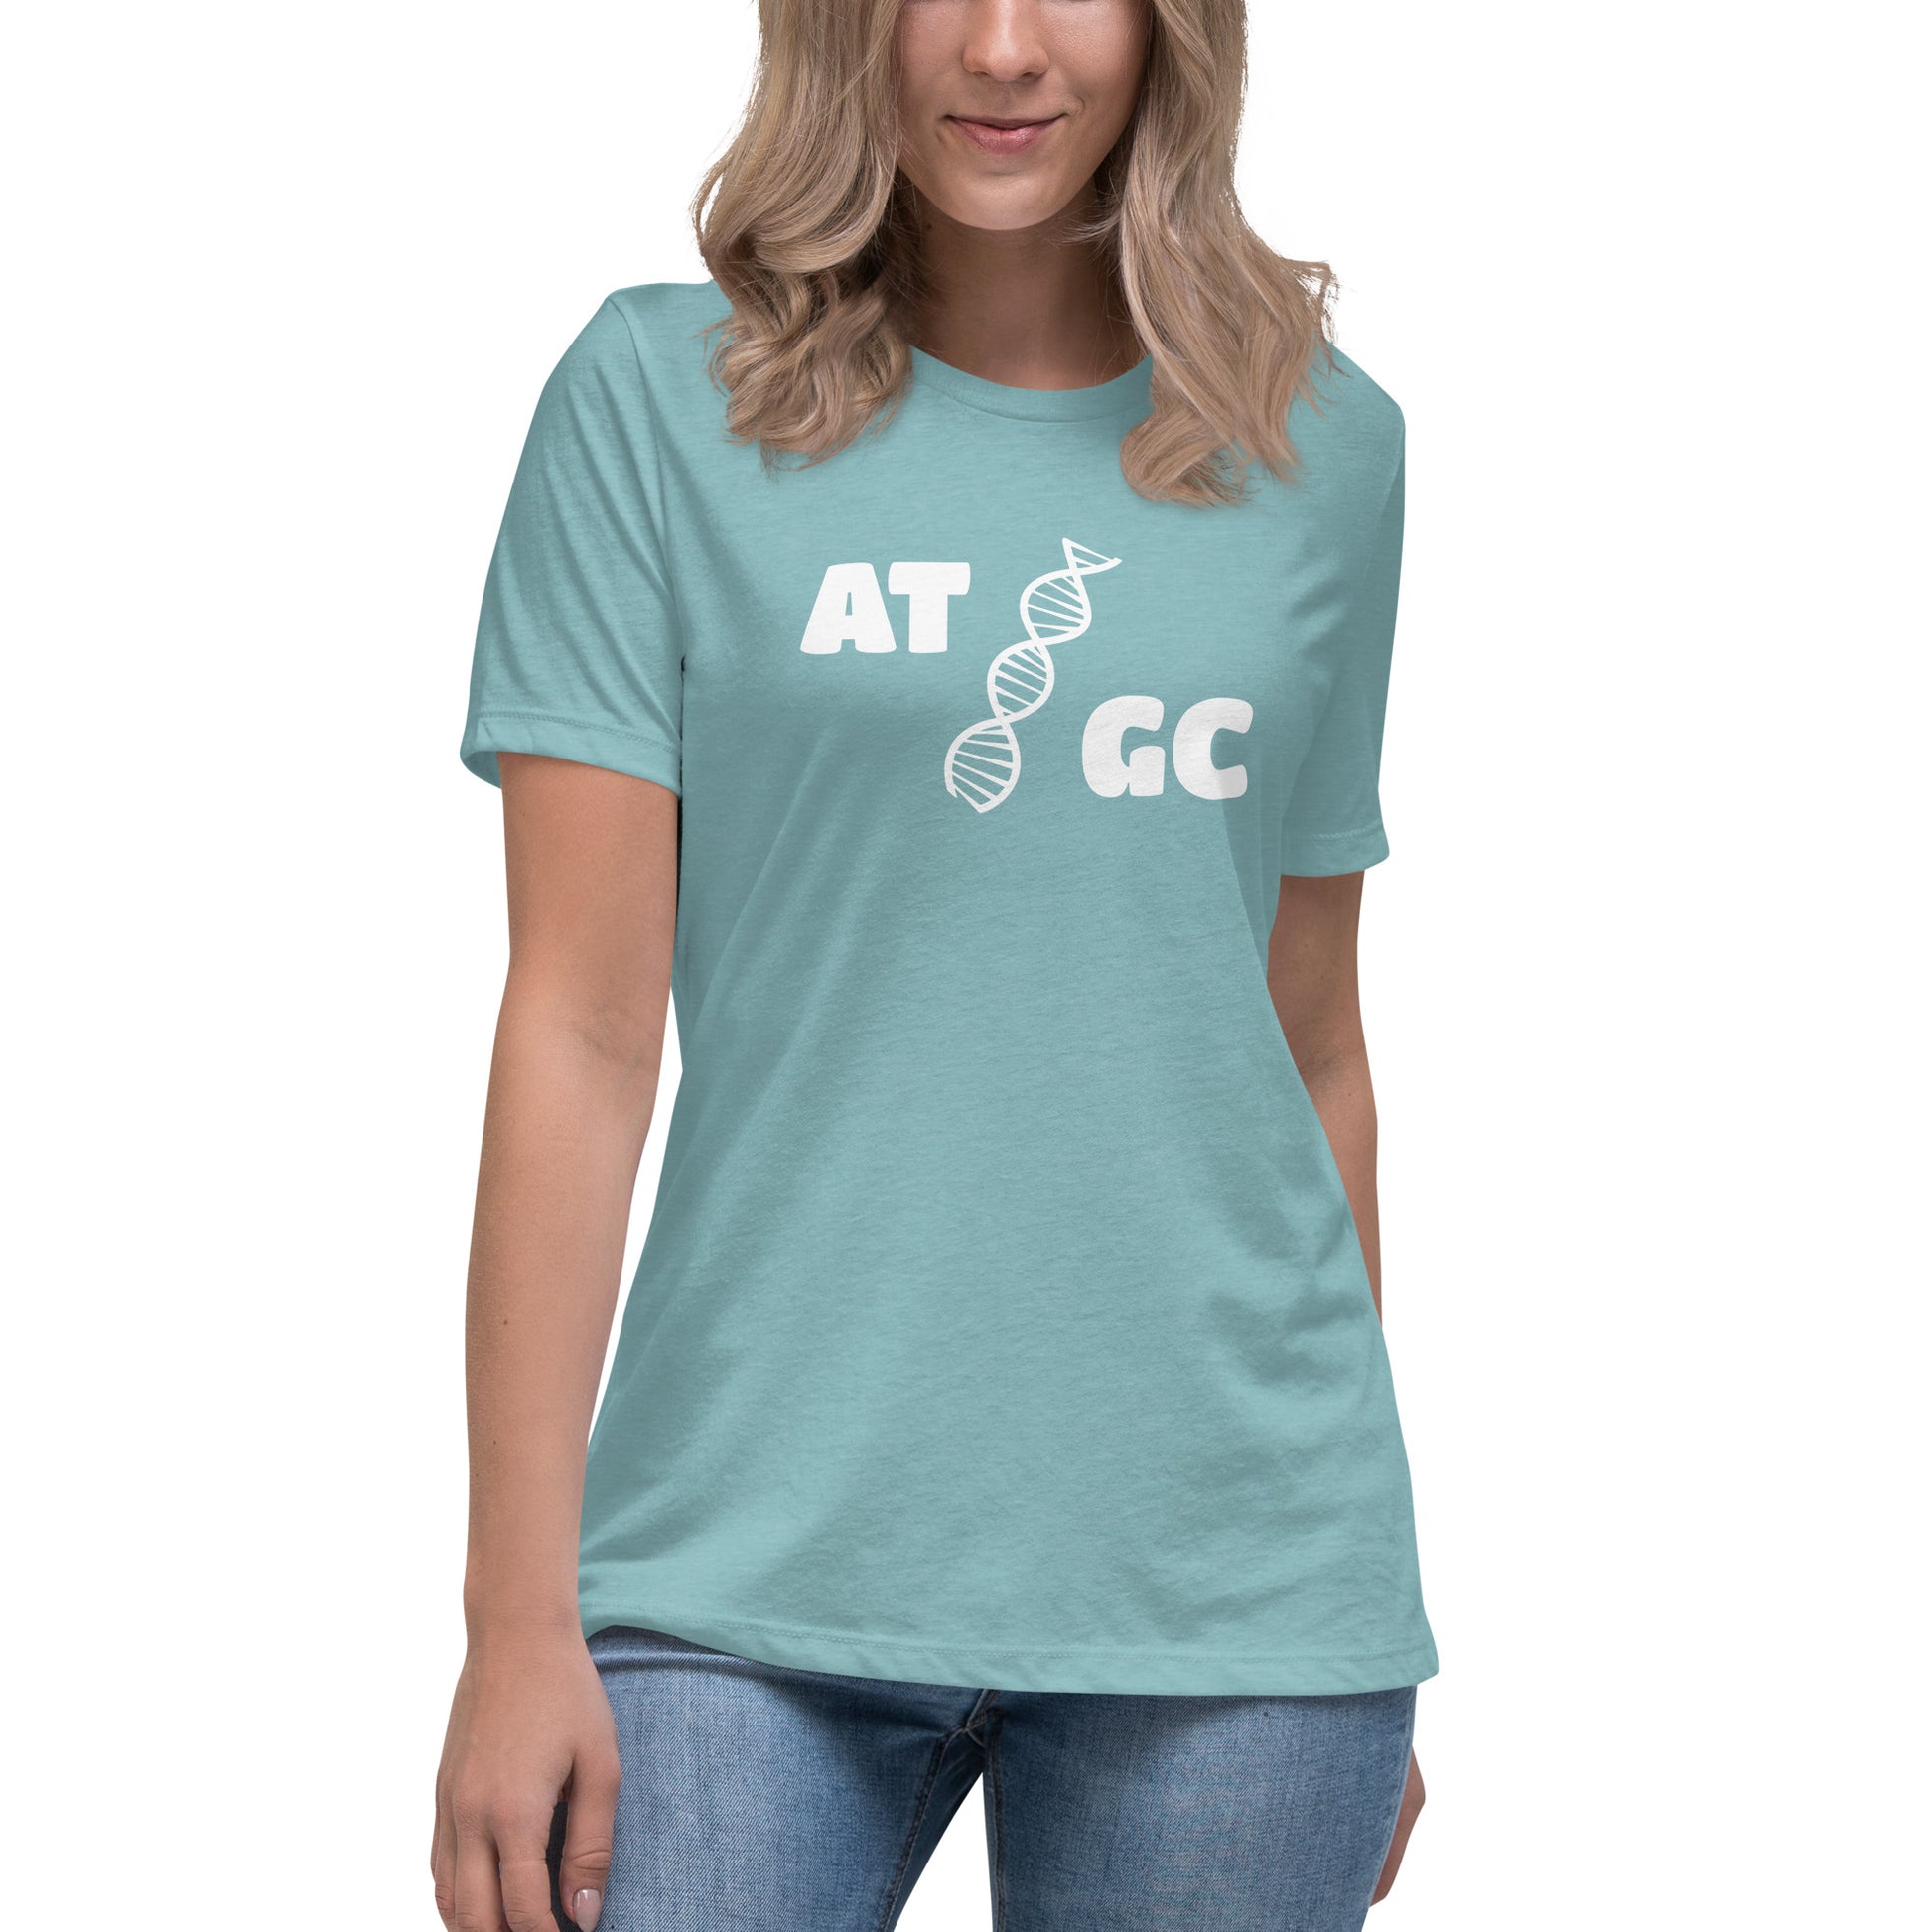 Women with blue lagoon t-shirt with image of a DNA string and the text "ATGC"